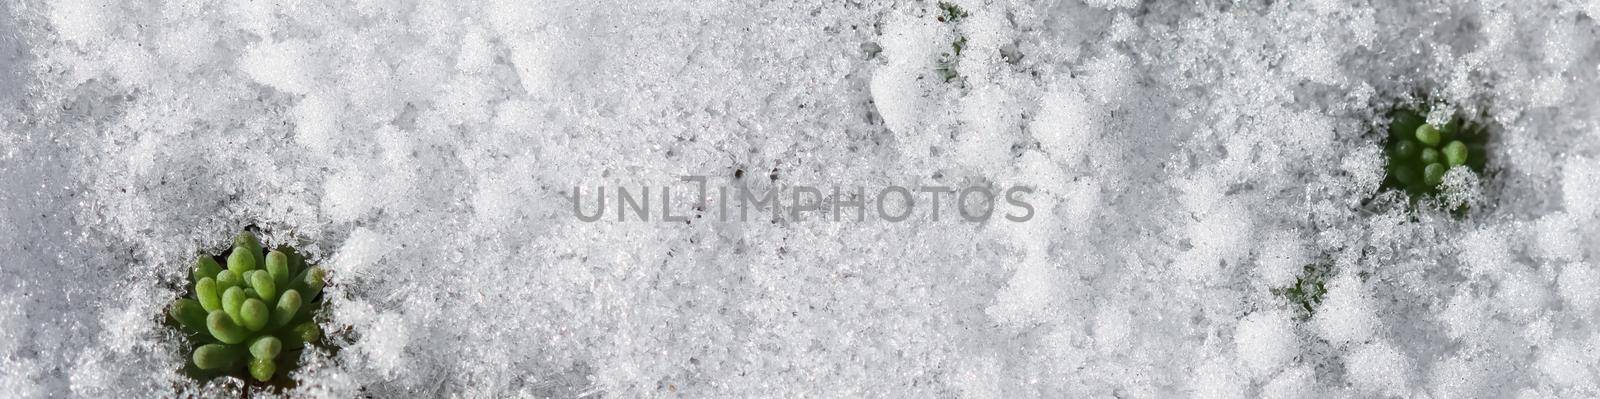 Texture of fresh snow and growing green plants. Natural spring background by Olayola